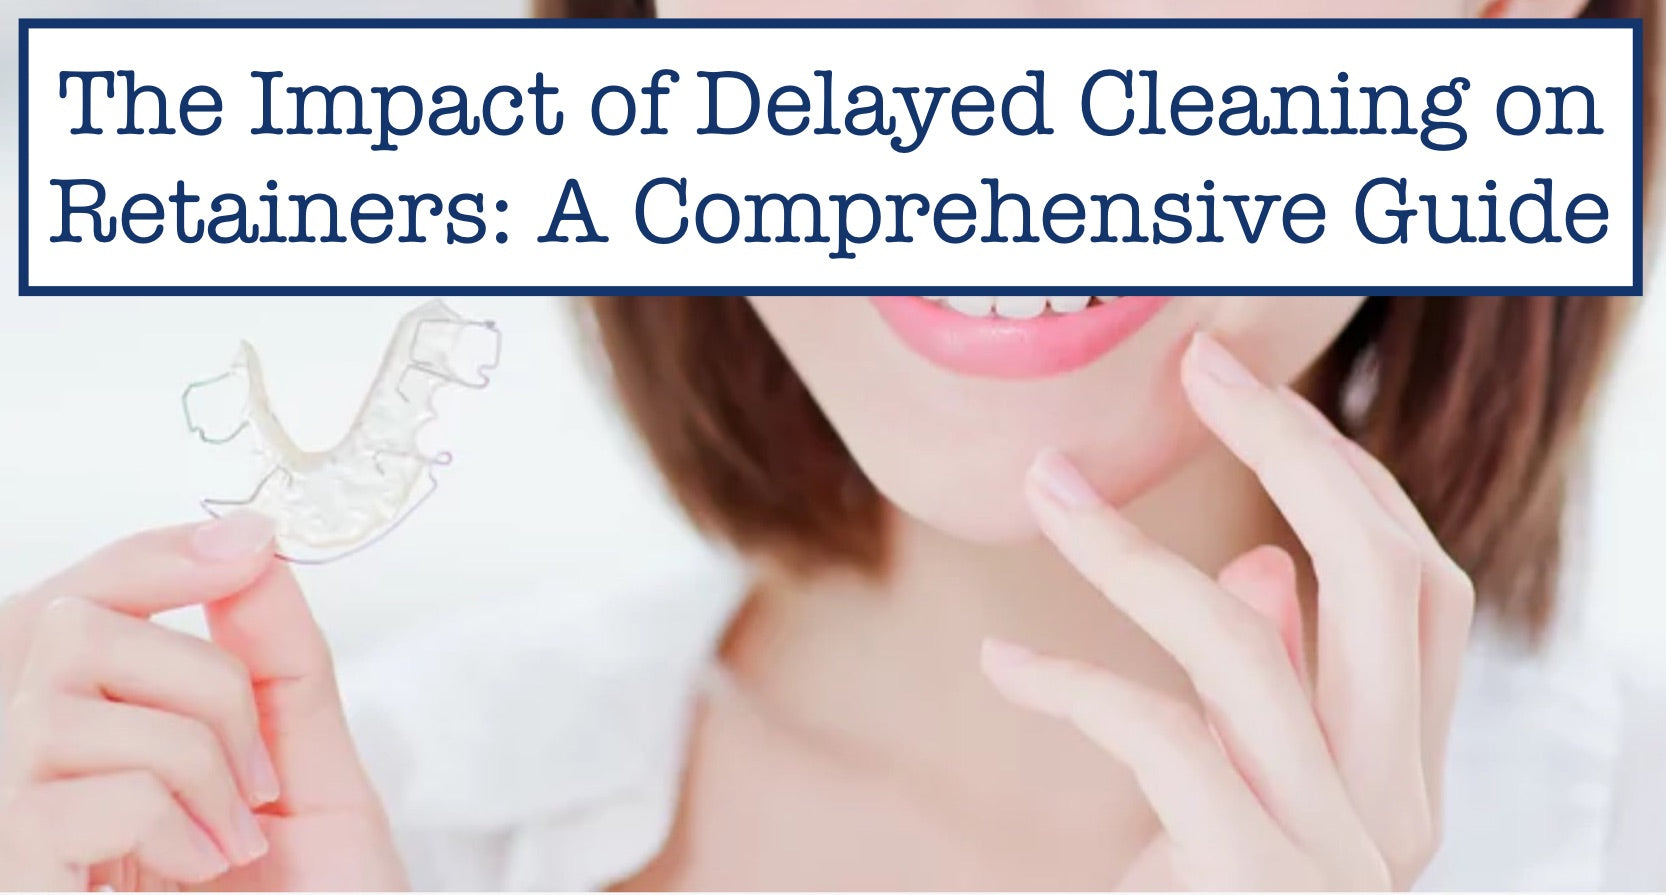 The Impact of Delayed Cleaning on Retainers: A Comprehensive Guide